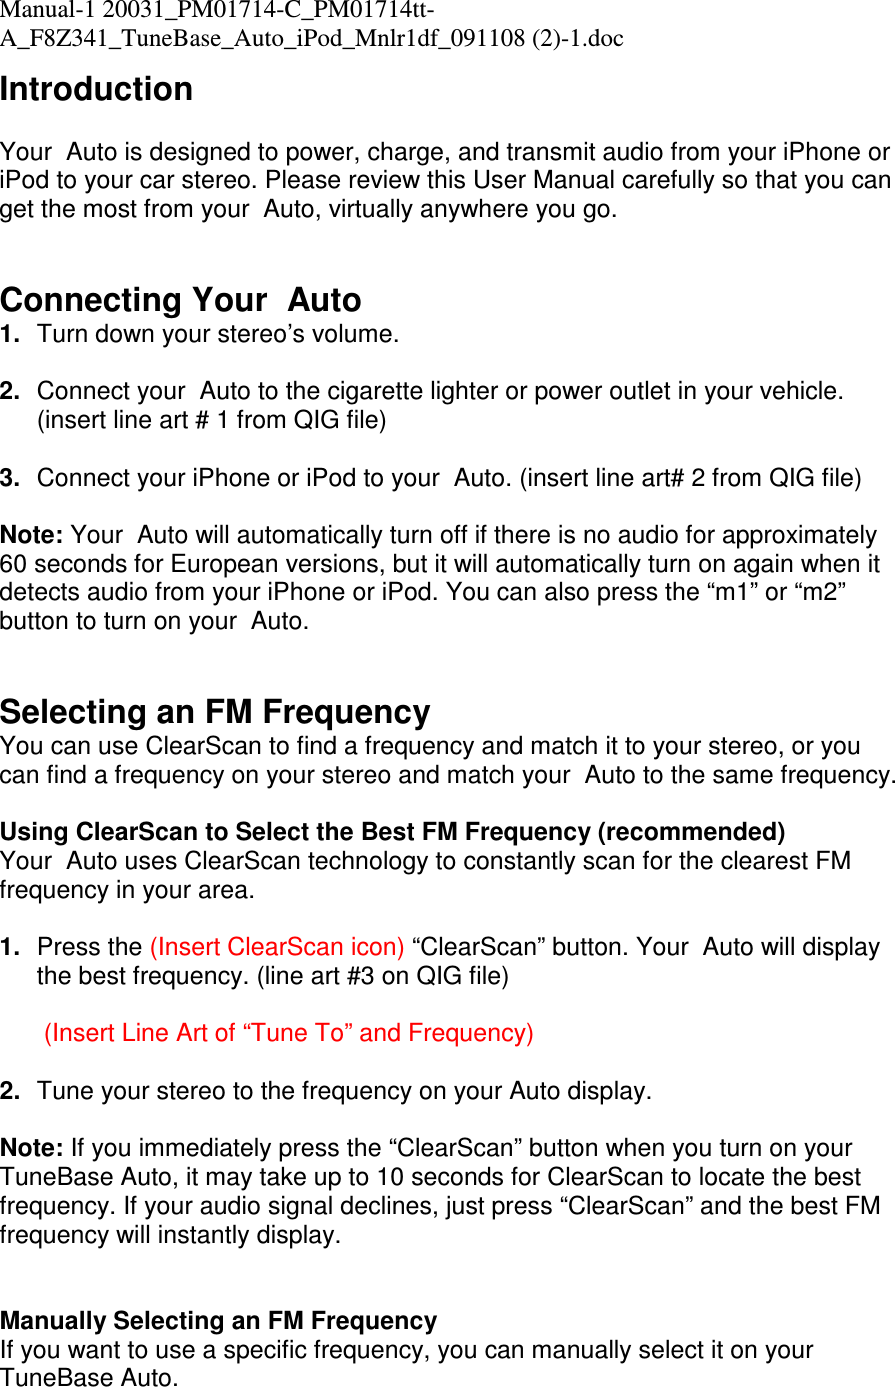 Manual-1 20031_PM01714-C_PM01714tt-A_F8Z341_TuneBase_Auto_iPod_Mnlr1df_091108 (2)-1.doc  Introduction  Your  Auto is designed to power, charge, and transmit audio from your iPhone or iPod to your car stereo. Please review this User Manual carefully so that you can get the most from your  Auto, virtually anywhere you go.    Connecting Your  Auto 1.  Turn down your stereo’s volume.  2.  Connect your  Auto to the cigarette lighter or power outlet in your vehicle. (insert line art # 1 from QIG file)  3.  Connect your iPhone or iPod to your  Auto. (insert line art# 2 from QIG file)  Note: Your  Auto will automatically turn off if there is no audio for approximately 60 seconds for European versions, but it will automatically turn on again when it detects audio from your iPhone or iPod. You can also press the “m1” or “m2” button to turn on your  Auto.   Selecting an FM Frequency You can use ClearScan to find a frequency and match it to your stereo, or you can find a frequency on your stereo and match your  Auto to the same frequency.  Using ClearScan to Select the Best FM Frequency (recommended) Your  Auto uses ClearScan technology to constantly scan for the clearest FM frequency in your area.  1.  Press the (Insert ClearScan icon) “ClearScan” button. Your  Auto will display the best frequency. (line art #3 on QIG file)   (Insert Line Art of “Tune To” and Frequency)  2.  Tune your stereo to the frequency on your Auto display.  Note: If you immediately press the “ClearScan” button when you turn on your TuneBase Auto, it may take up to 10 seconds for ClearScan to locate the best frequency. If your audio signal declines, just press “ClearScan” and the best FM frequency will instantly display.   Manually Selecting an FM Frequency If you want to use a specific frequency, you can manually select it on your TuneBase Auto.  